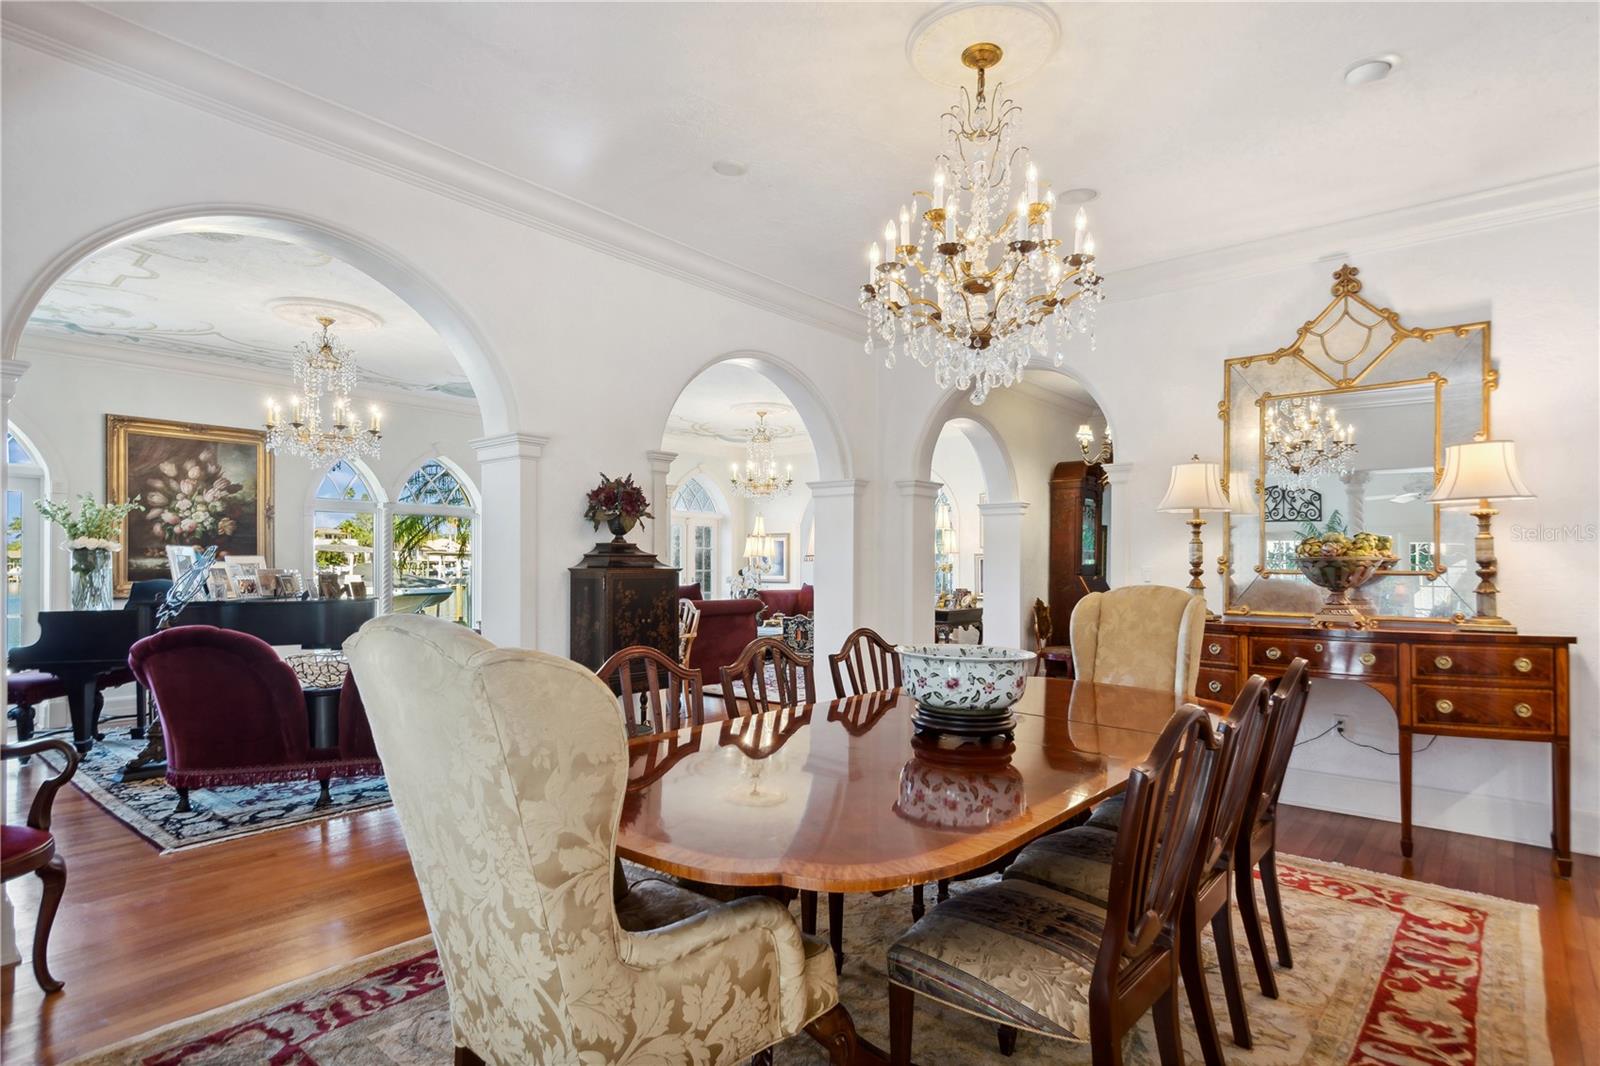 Large great room with large arched windows